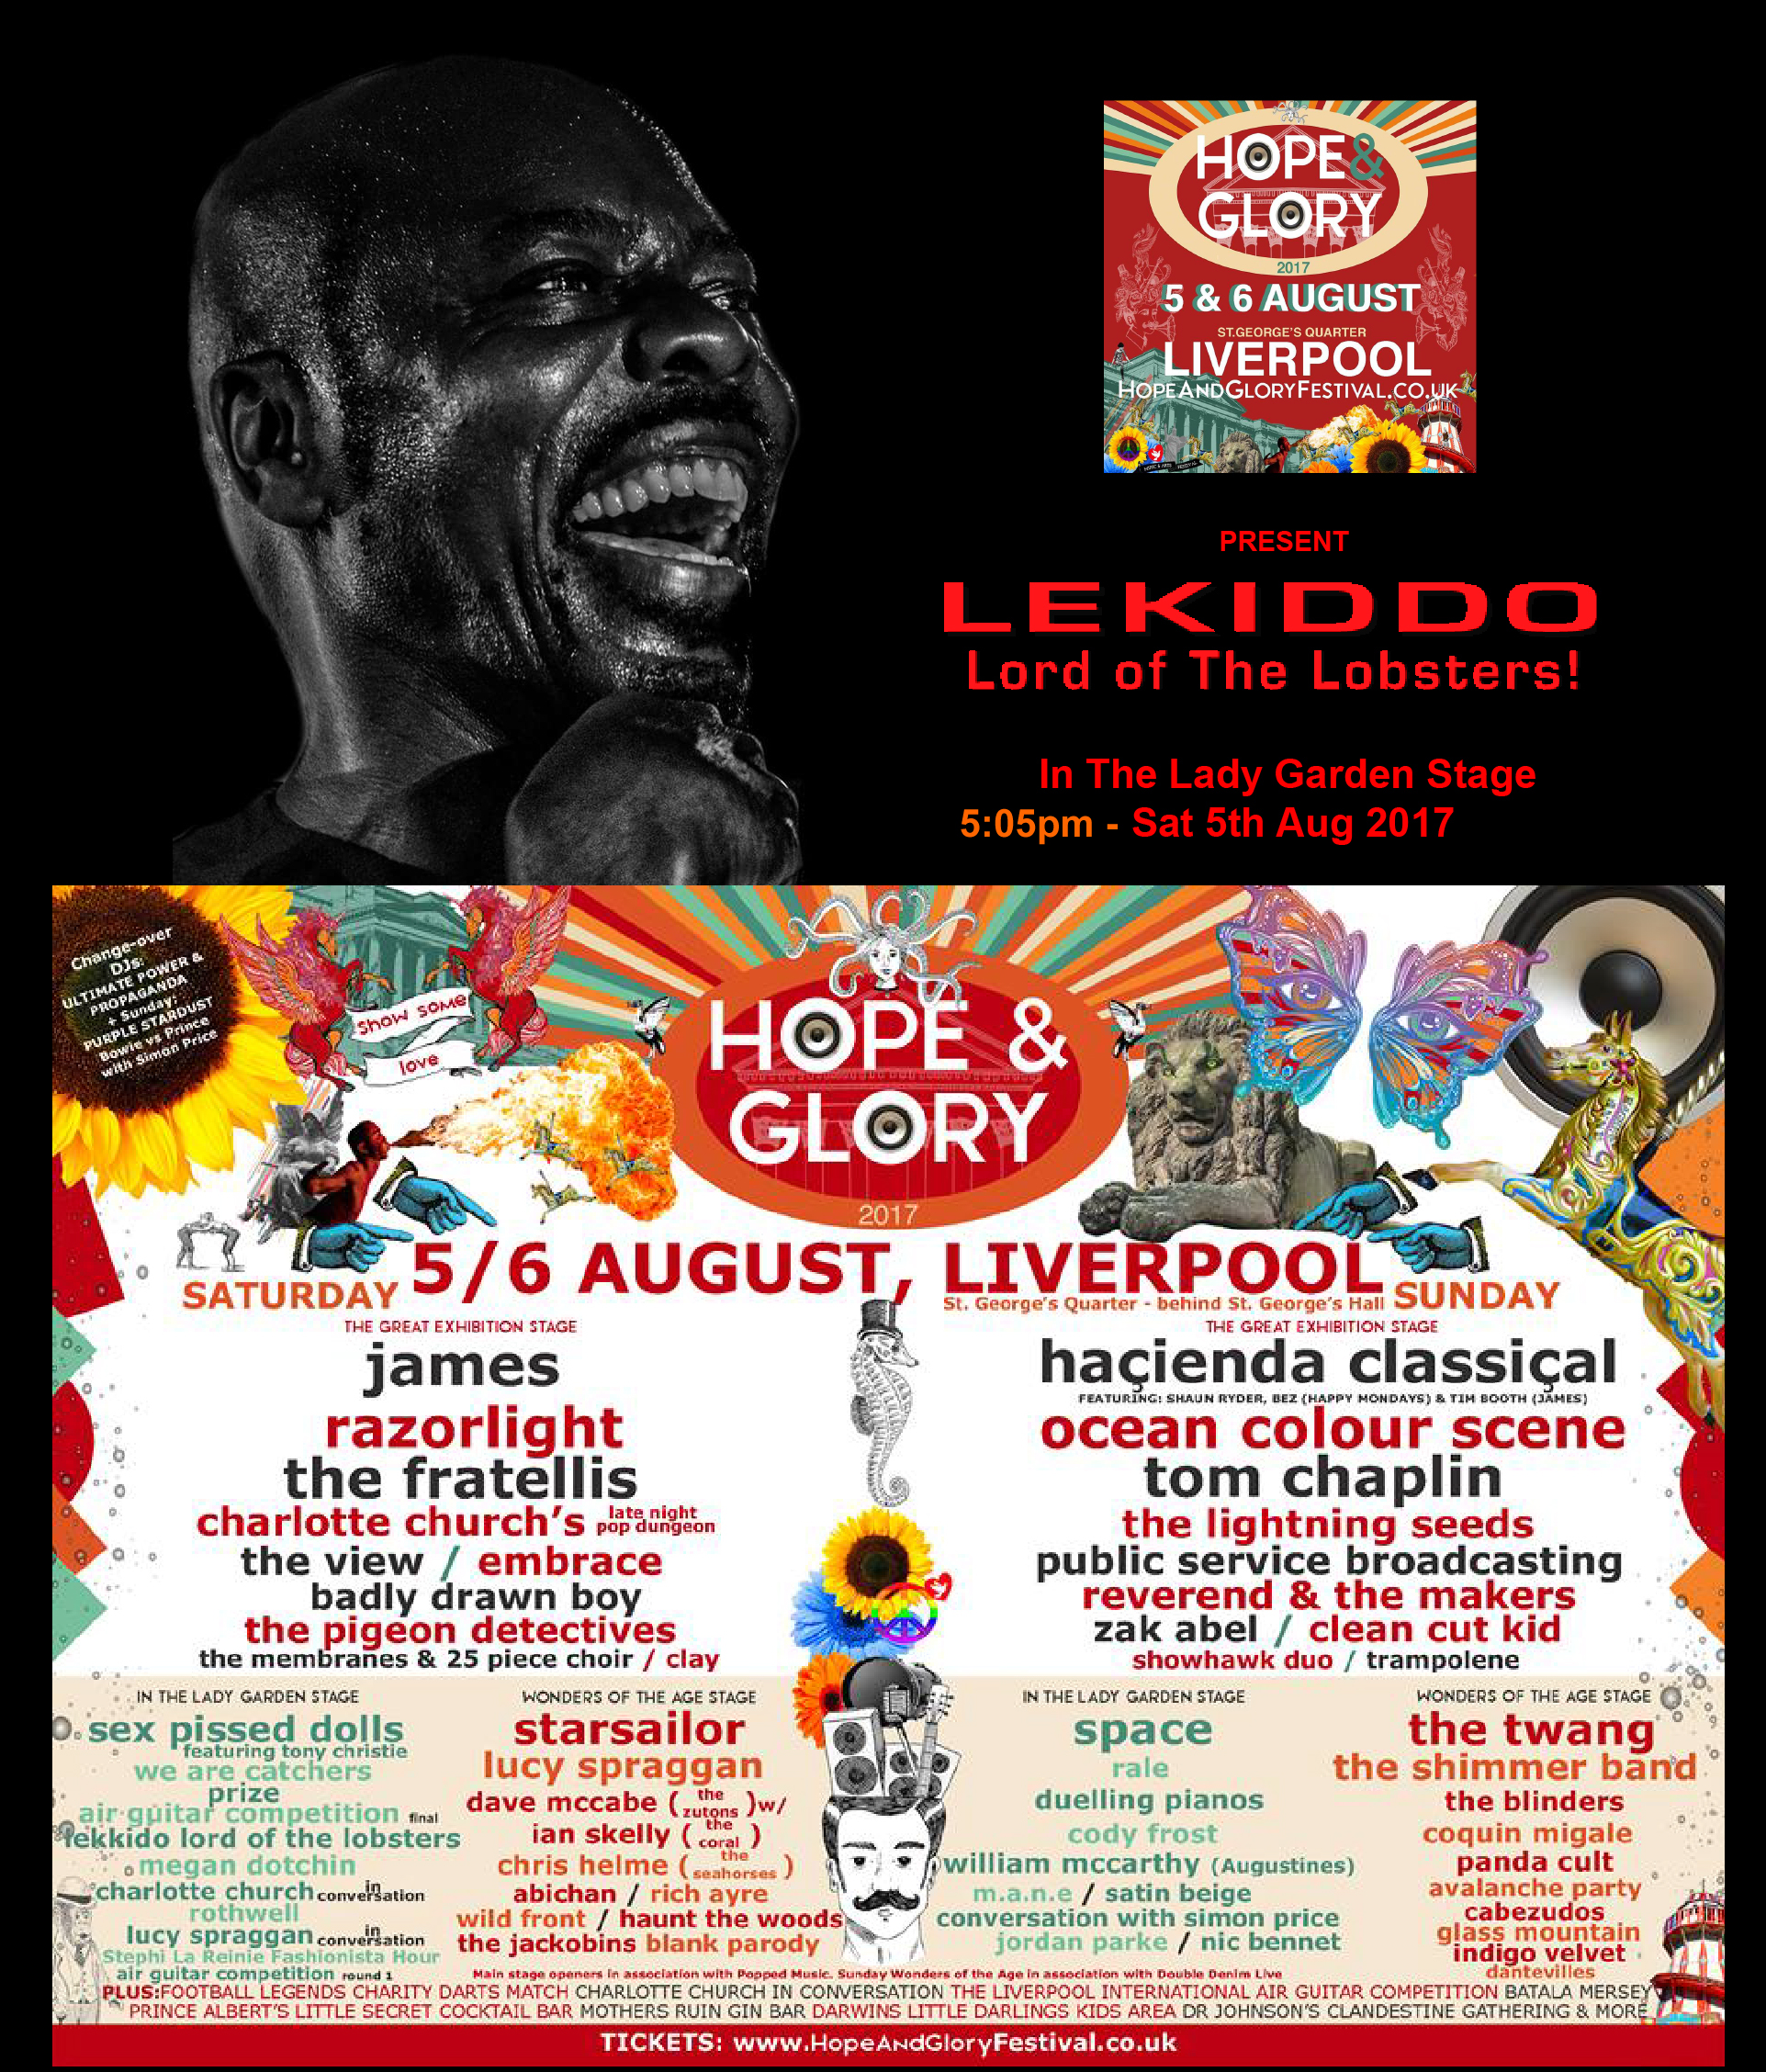 LEKIDDO - Lord of The Lobsters! live In the Lady Garden Stage 5tth August 2017